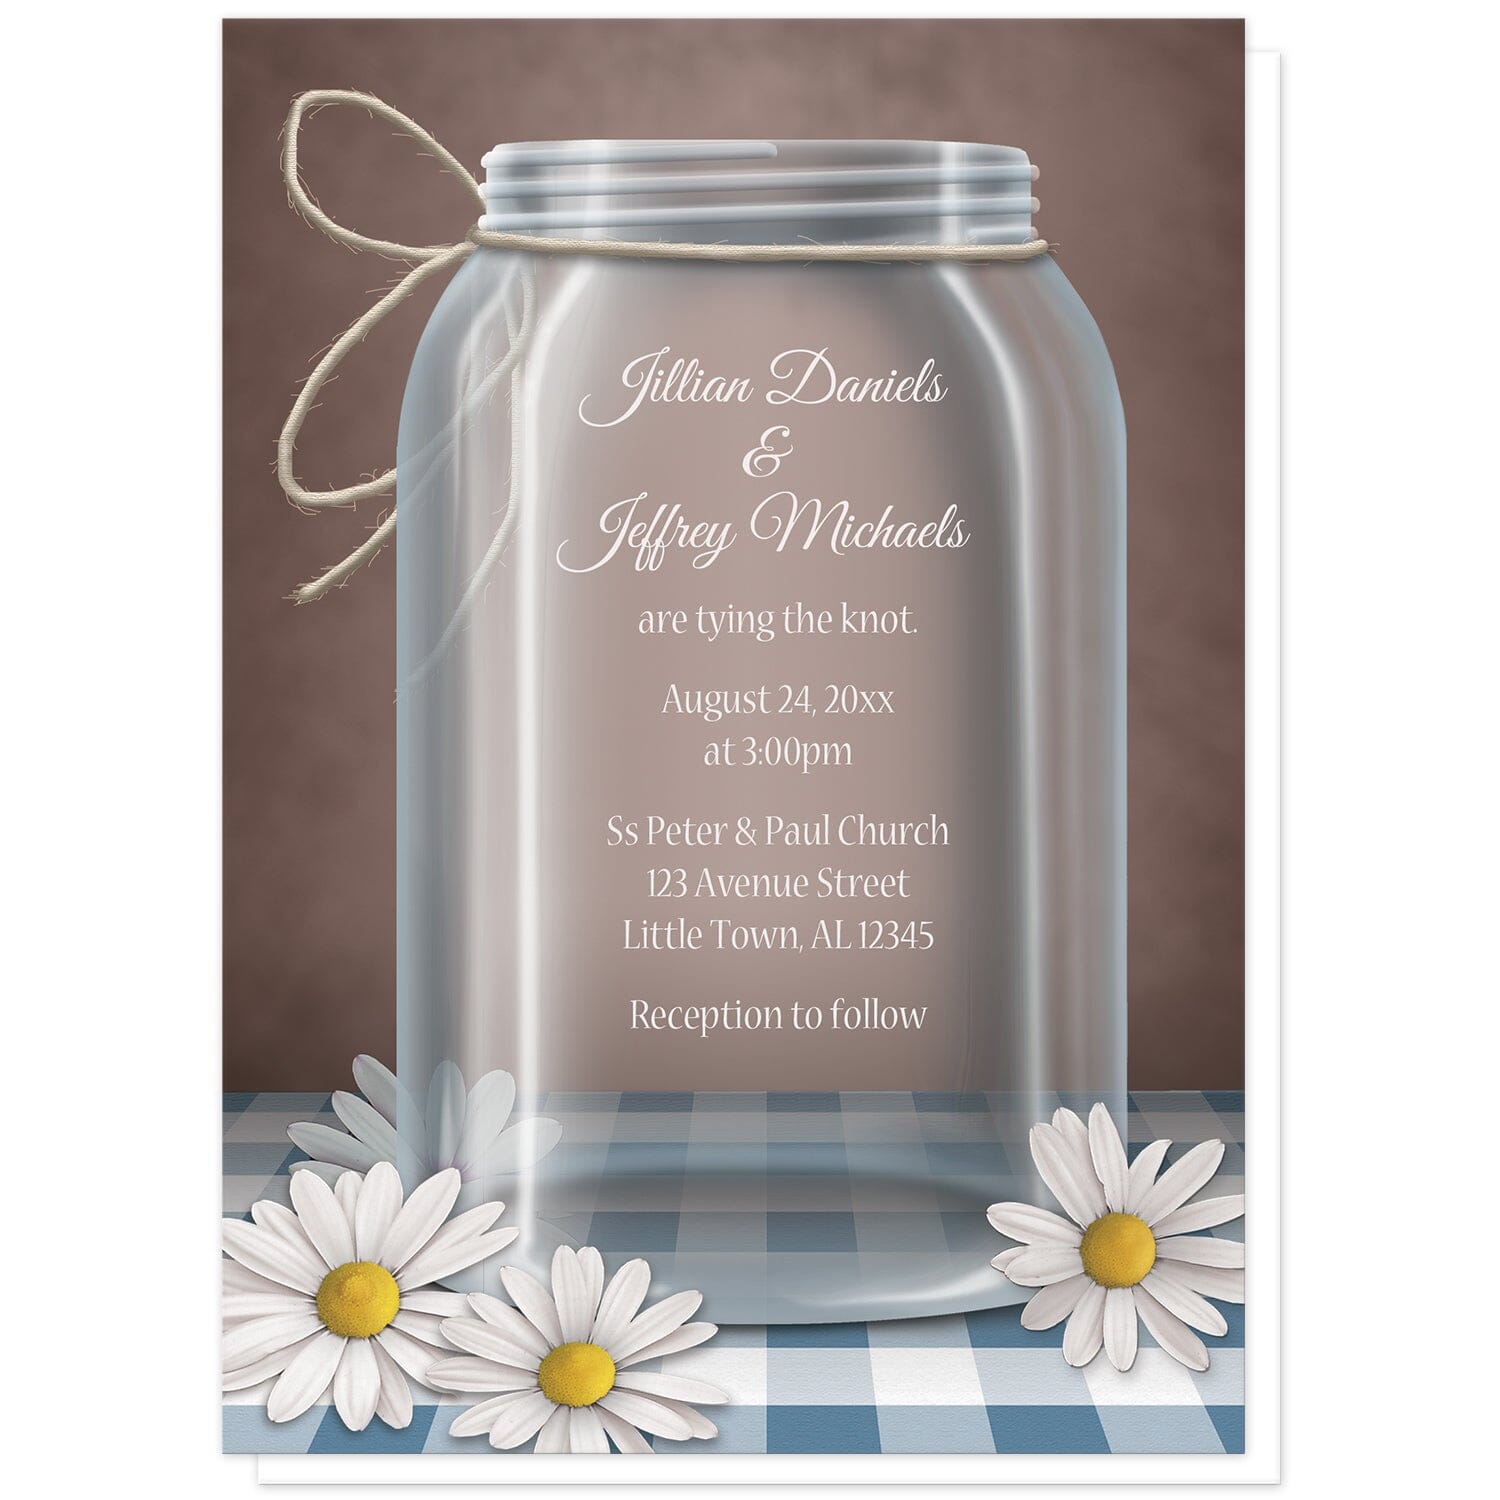 Country Mason Jar Daisy Gingham Wedding Invitations at Artistically Invited. Country mason jar daisy gingham wedding invitations featuring a beautiful illustration of a glass mason jar with twine tied around the neck of it. White daisies are scattered, laying at the base of the jar on a blue gingham table top over a vintage brown background design. 